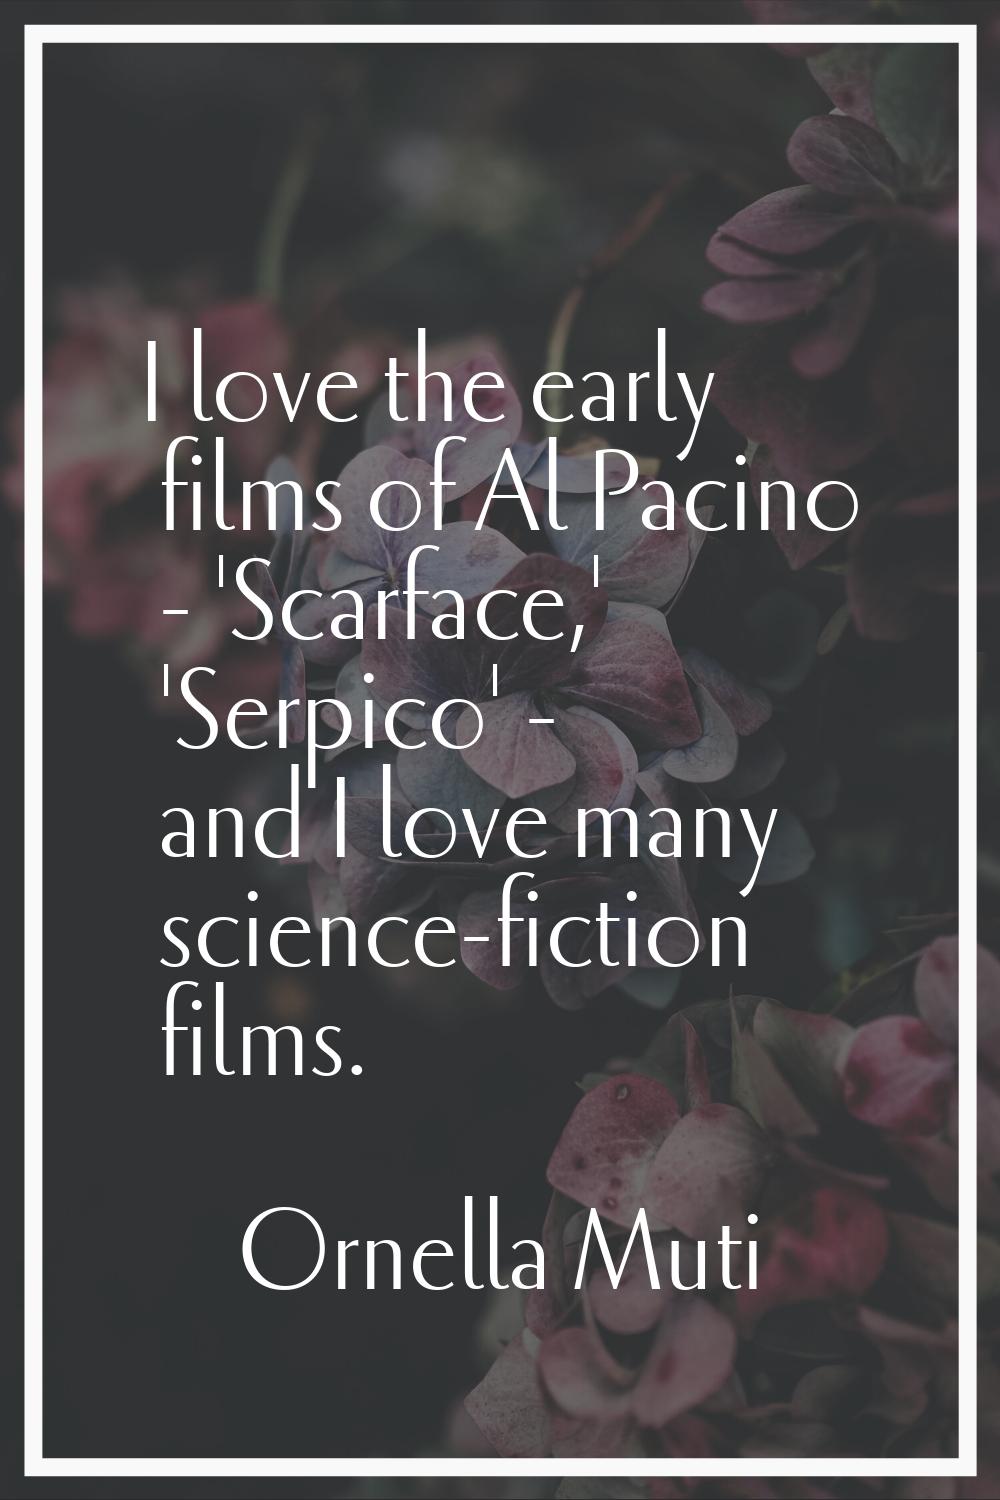 I love the early films of Al Pacino - 'Scarface,' 'Serpico' - and I love many science-fiction films